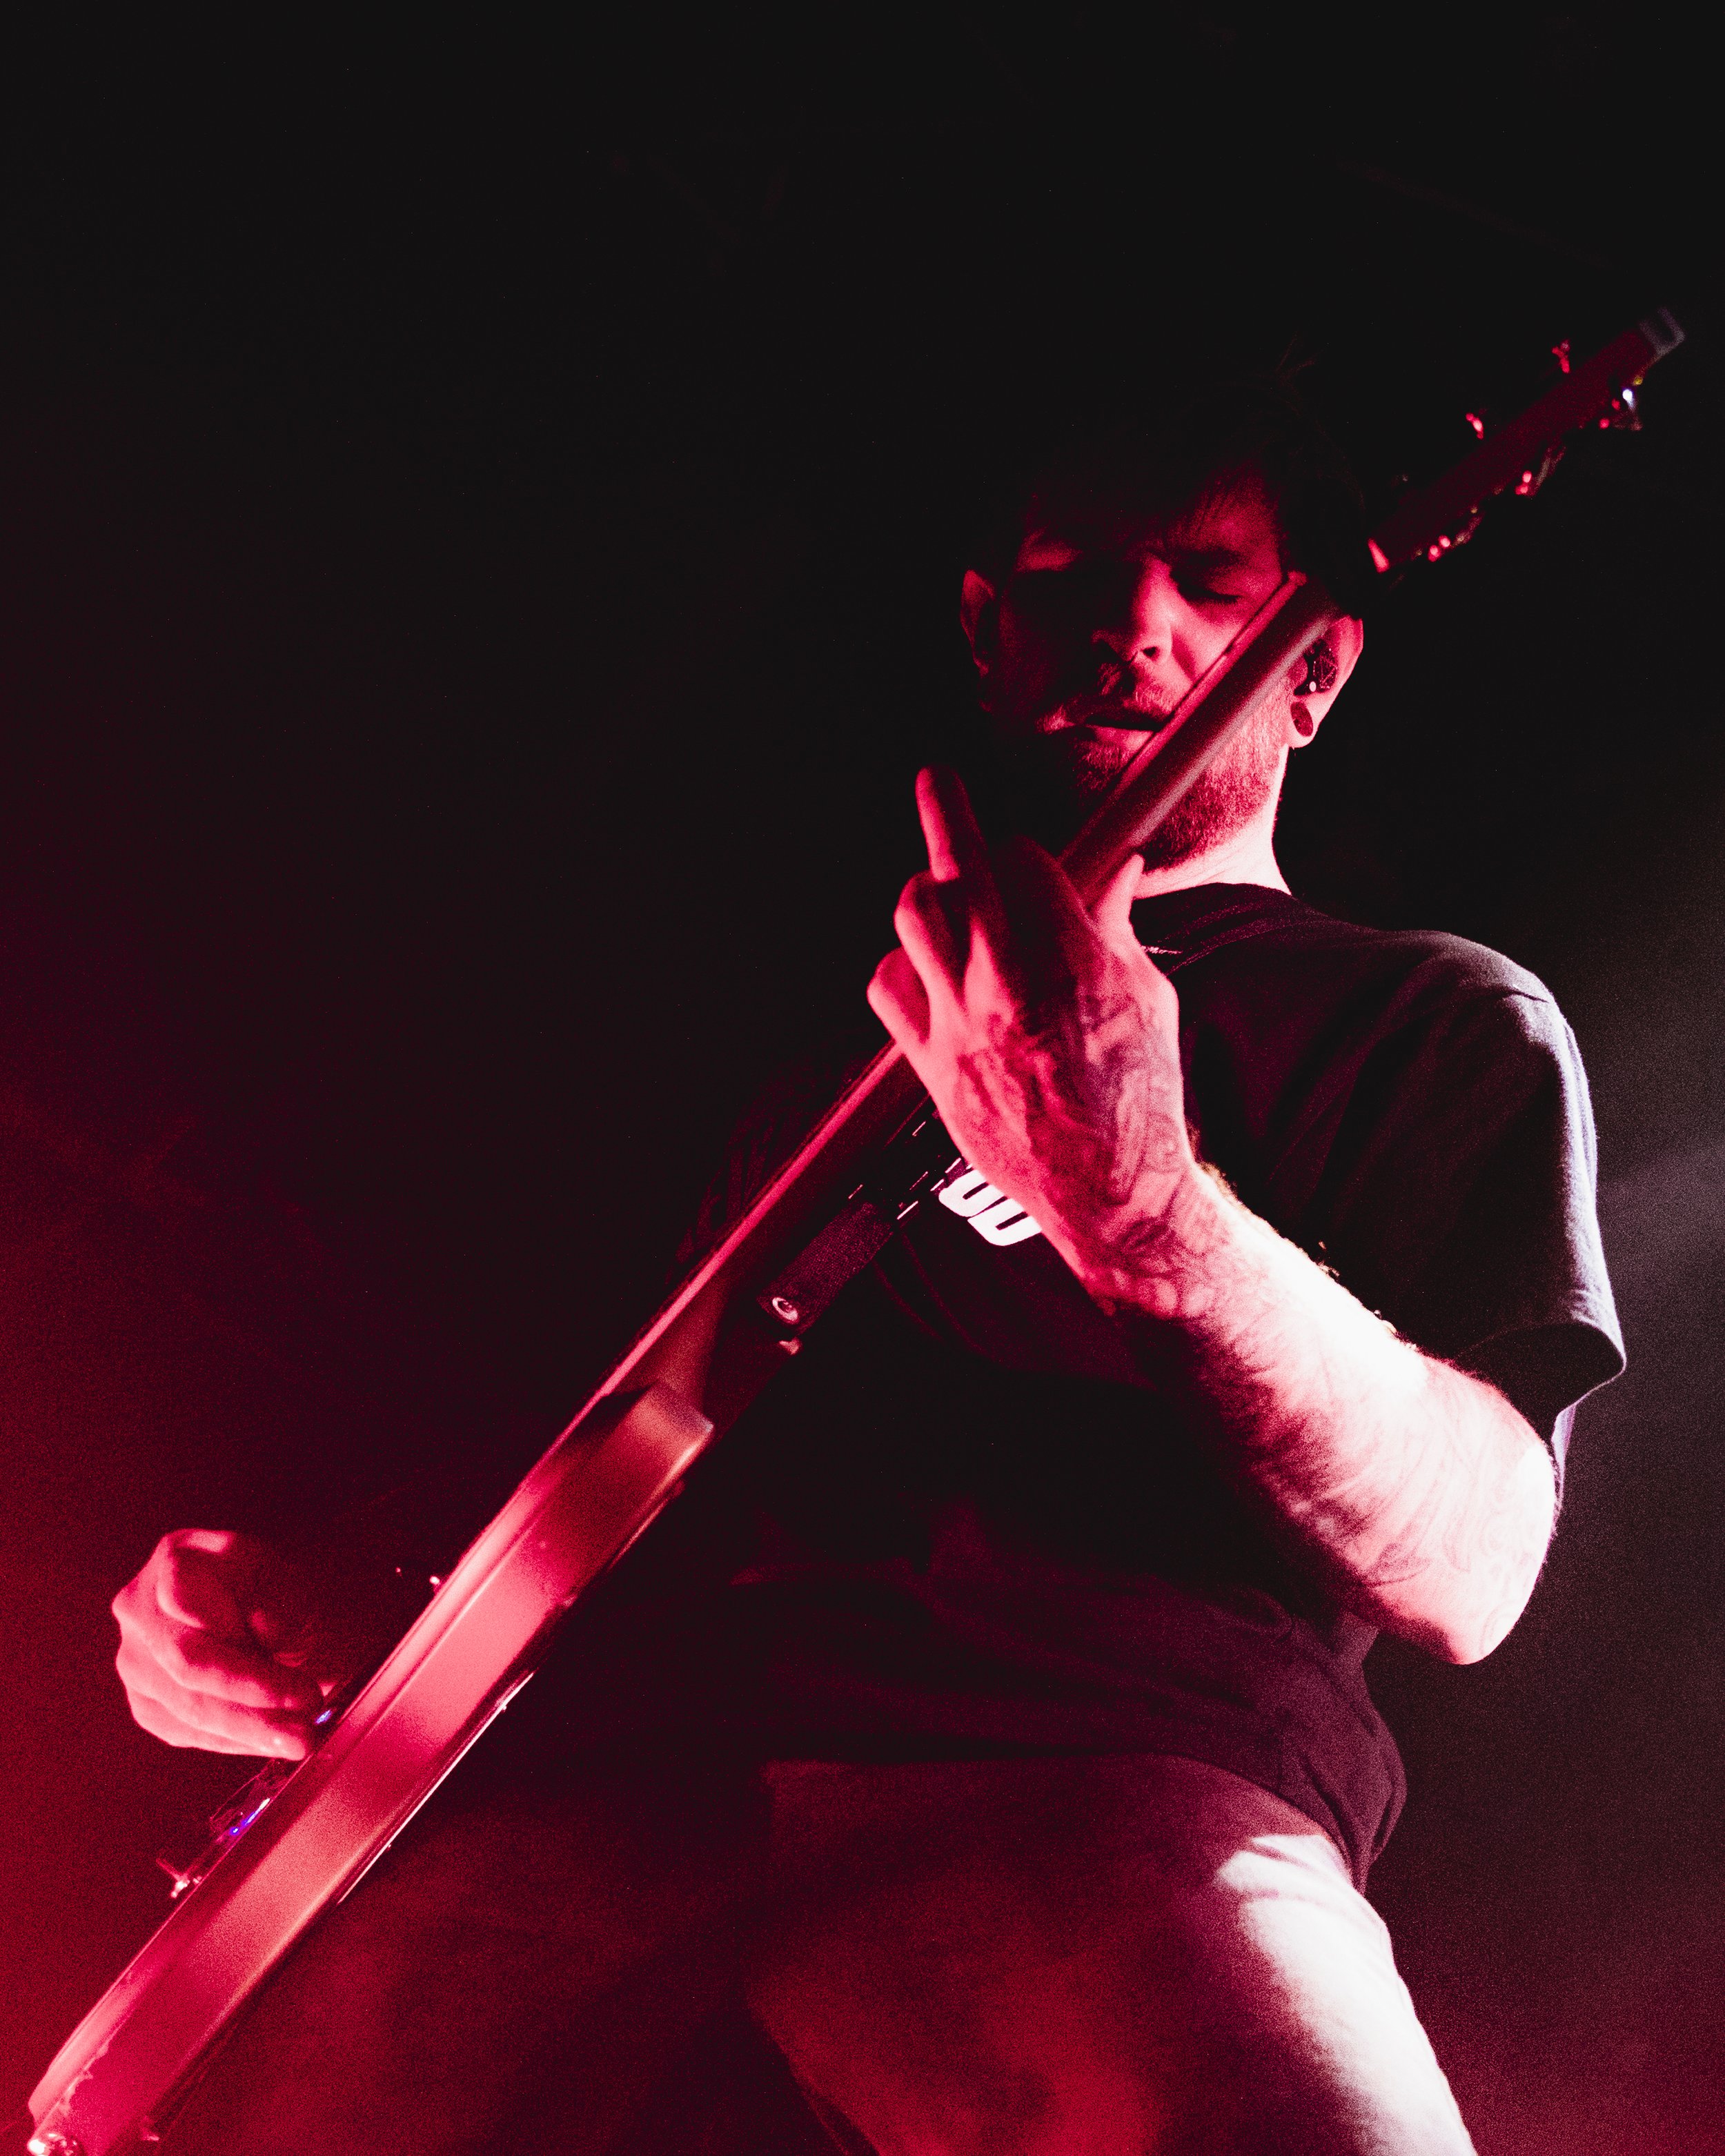 August Burns Red, The Devil Wears Prada -  20 YEAR ANNIVERSARY TOUR - Fillmore Auditorium - Denver, Colorado - Friday, March 10, 2023 - PHOTO BY Mowgli Miles of Interracial Friends - PHOTO BY Mowgli Miles of Interracial Friends-24.JPG